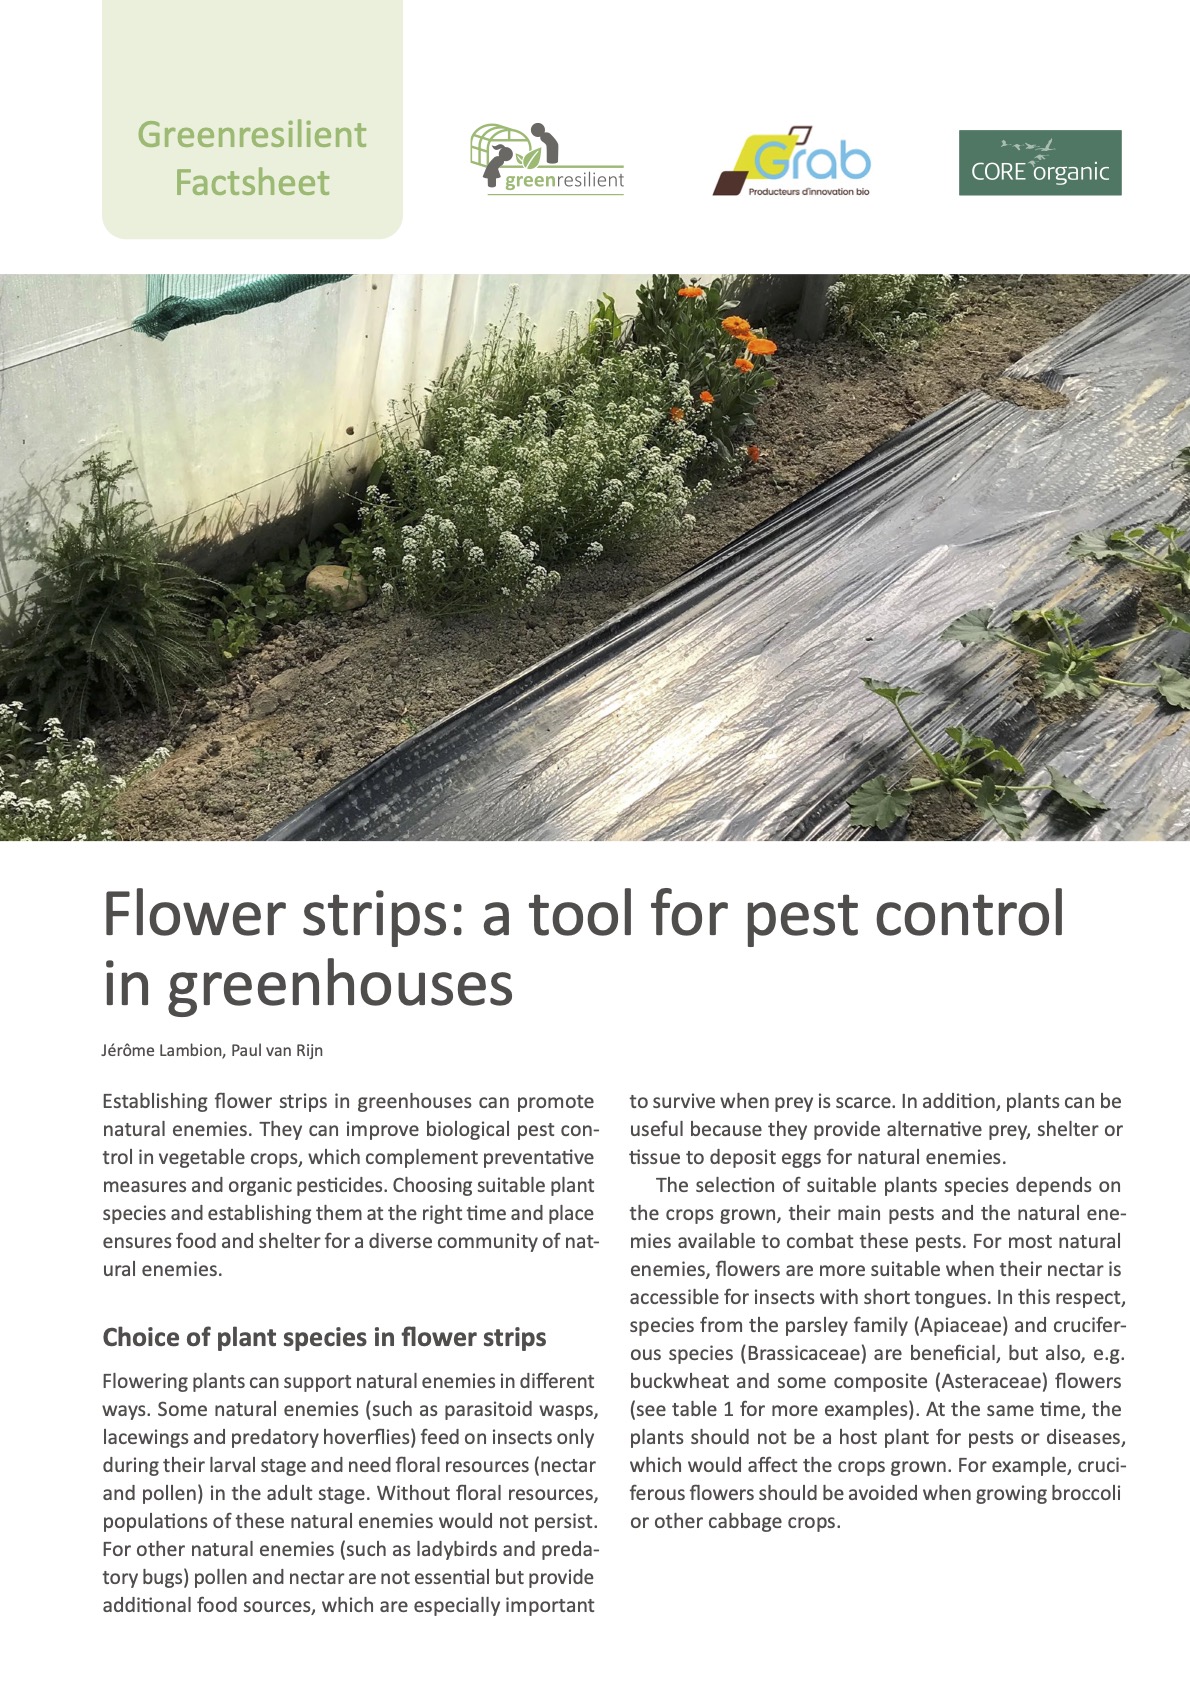 Flower strips: a tool for pest control in greenhouses (Greenresilient Factsheet)